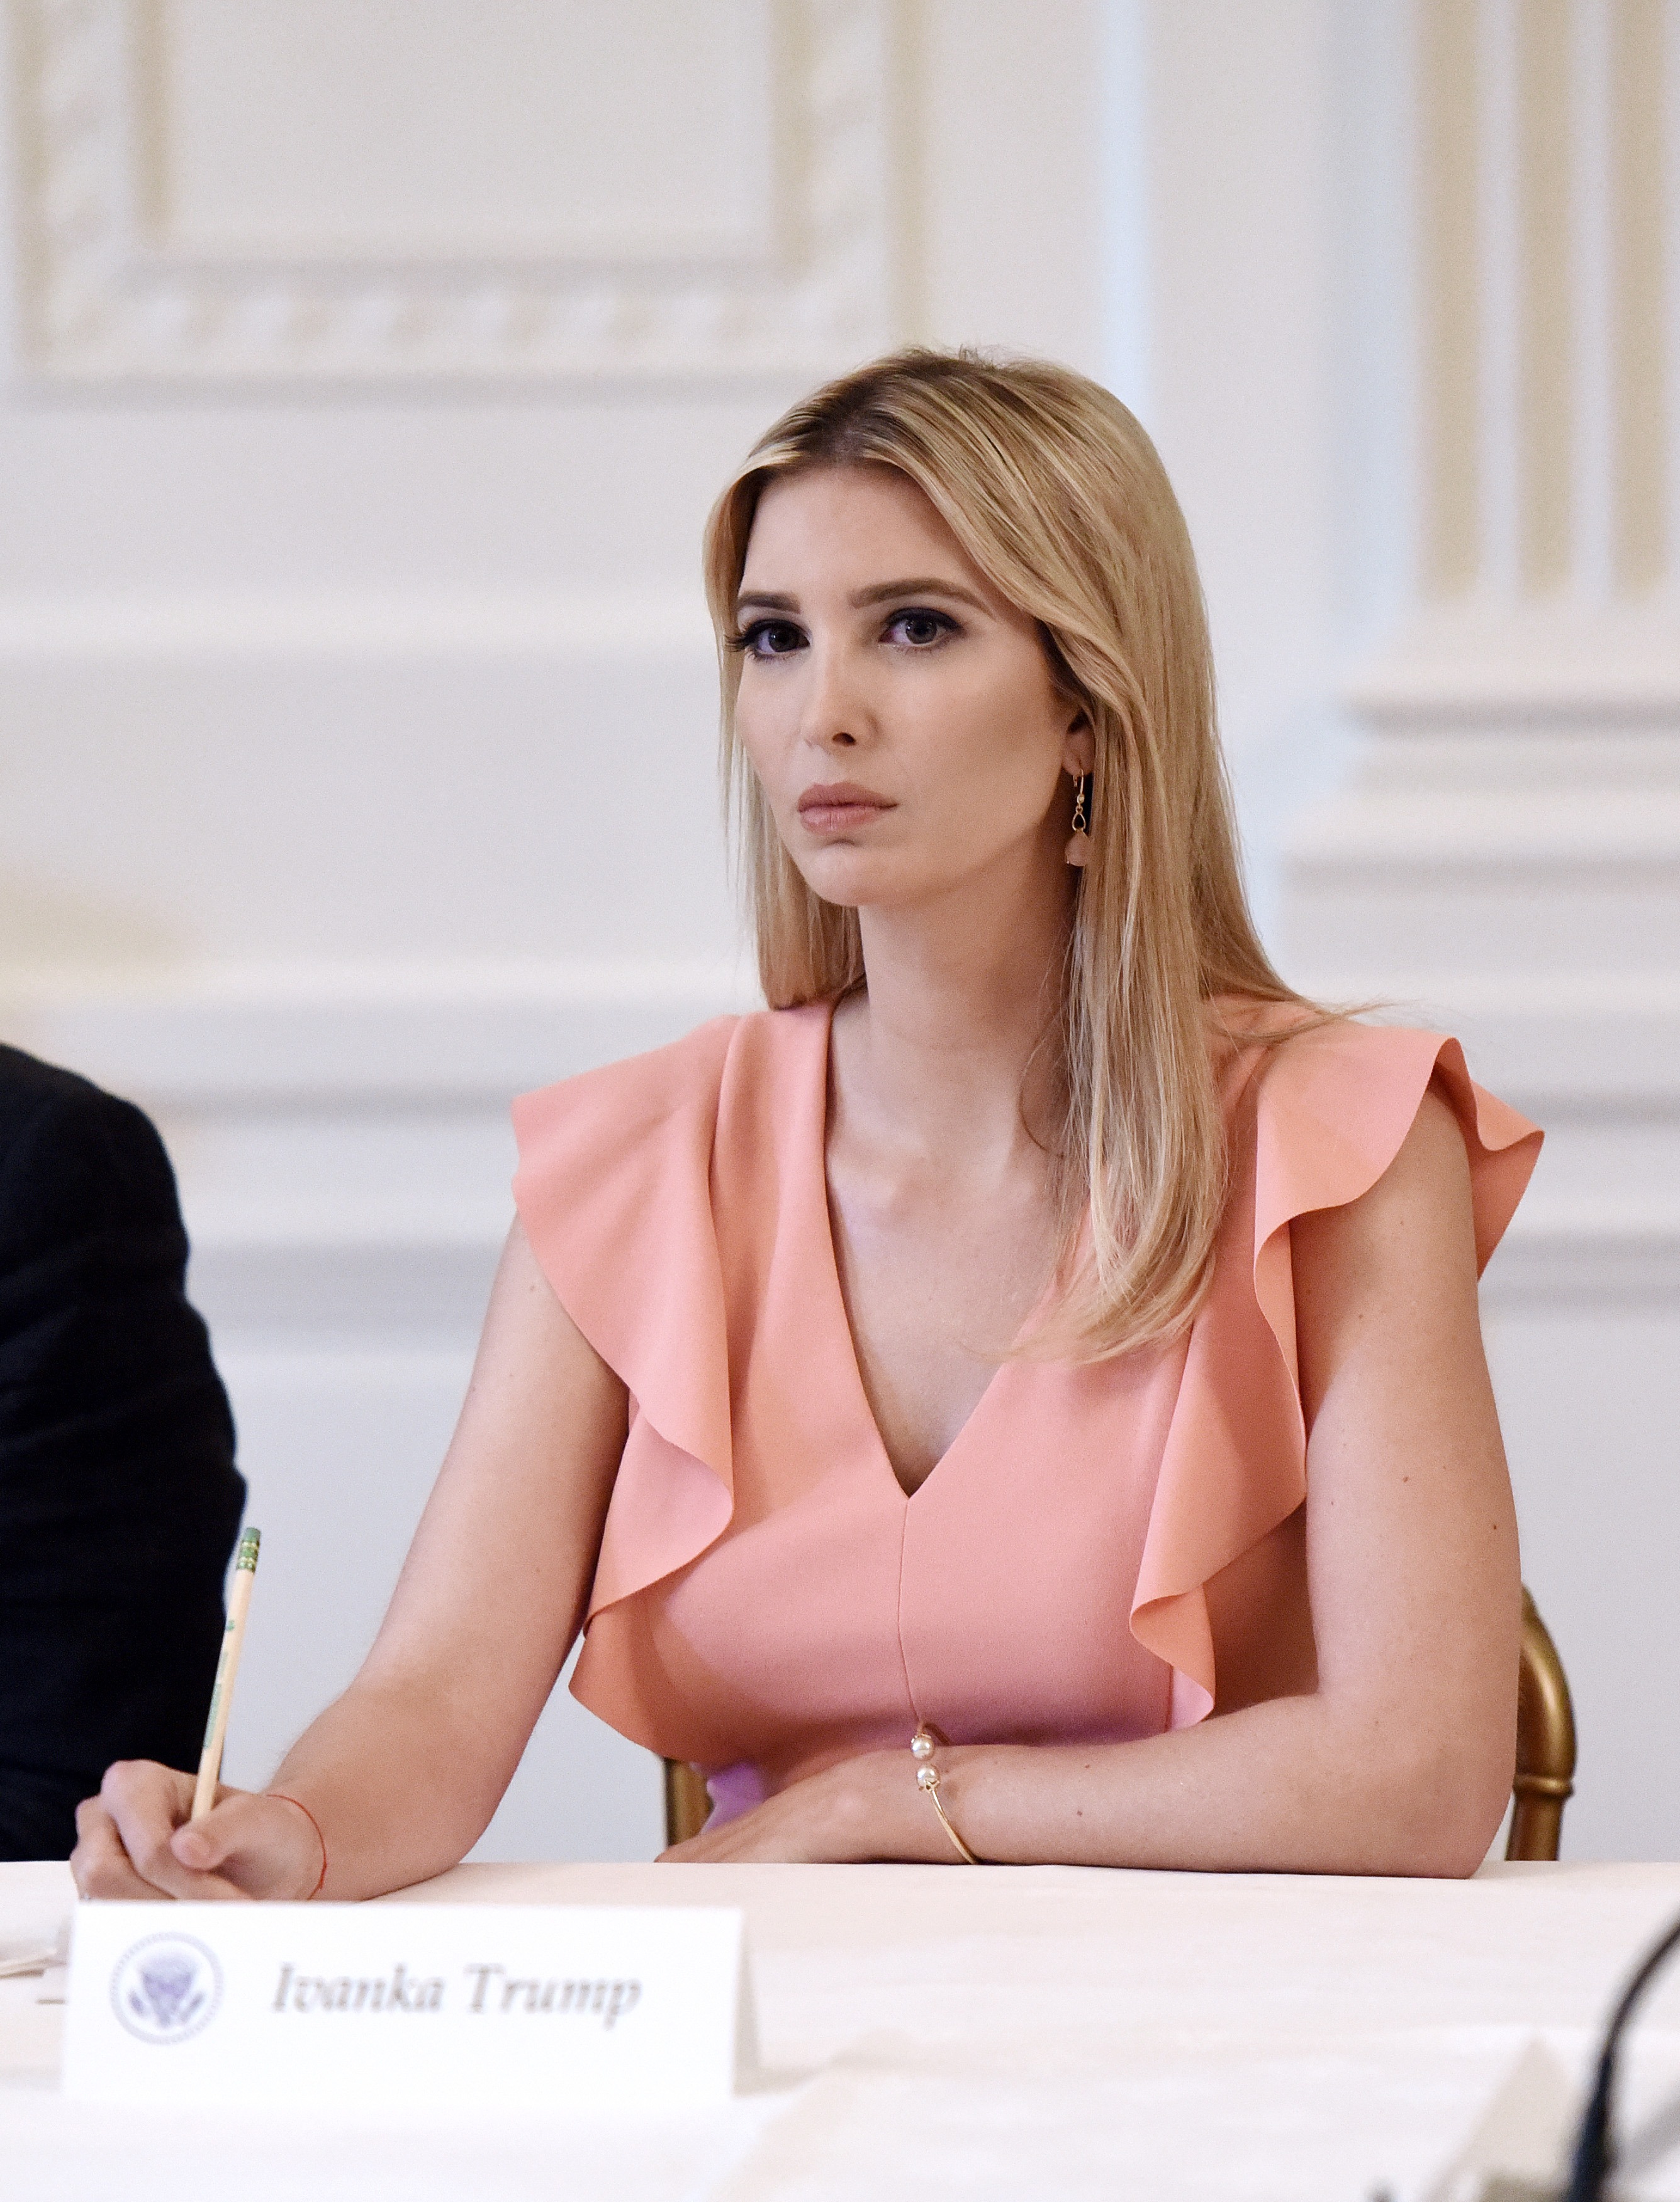 WASHINGTON, DC - JUNE 22: (AFP OUT) Ivanka Trump participates during  the American Leadership in Emerging Technology Event in the East Room of the White House June 22, 2017 in Washington, DC. (Photo by Olivier Douliery-Pool/Getty Images)